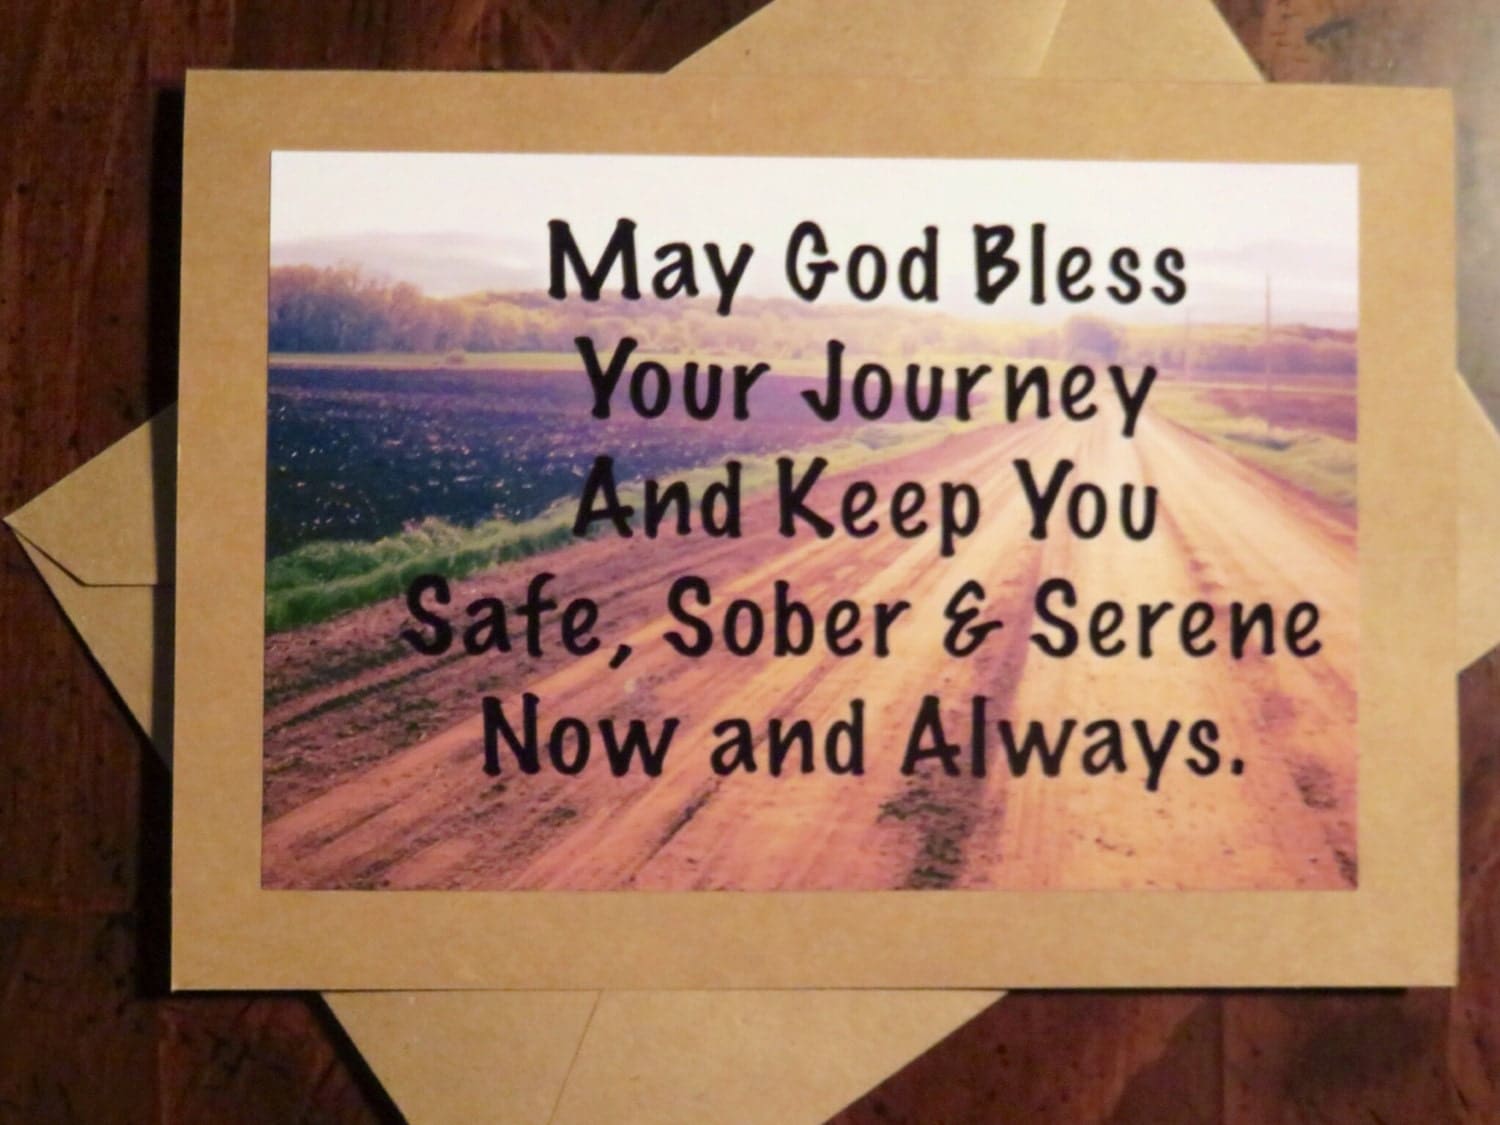 god bless in your journey